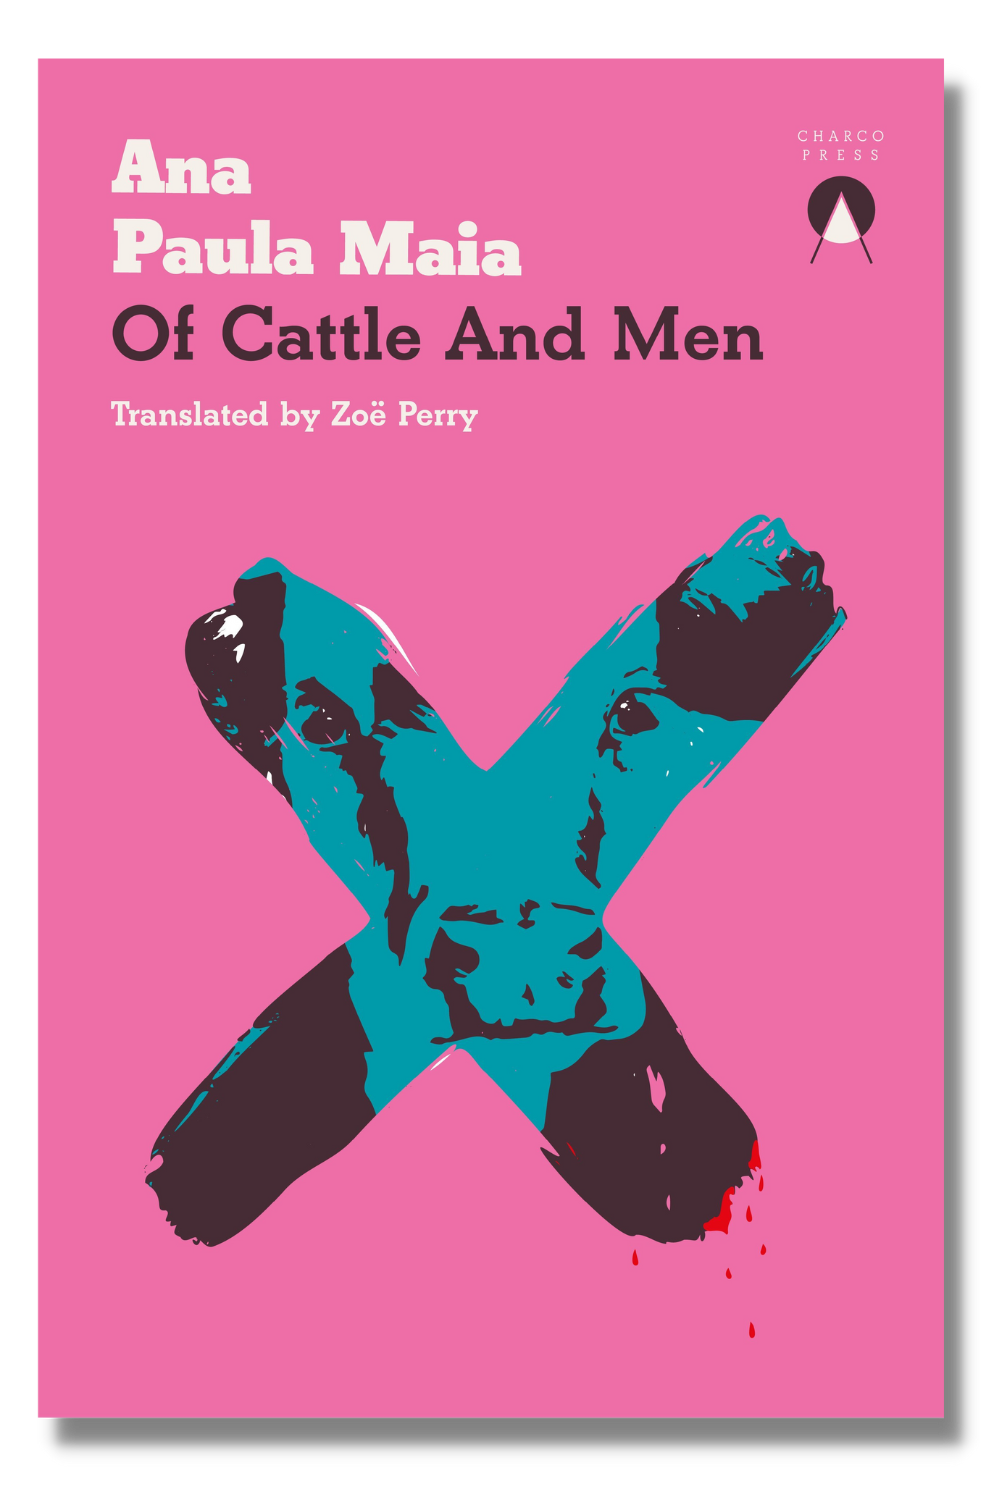 The cover of "Of Cattle and Men"